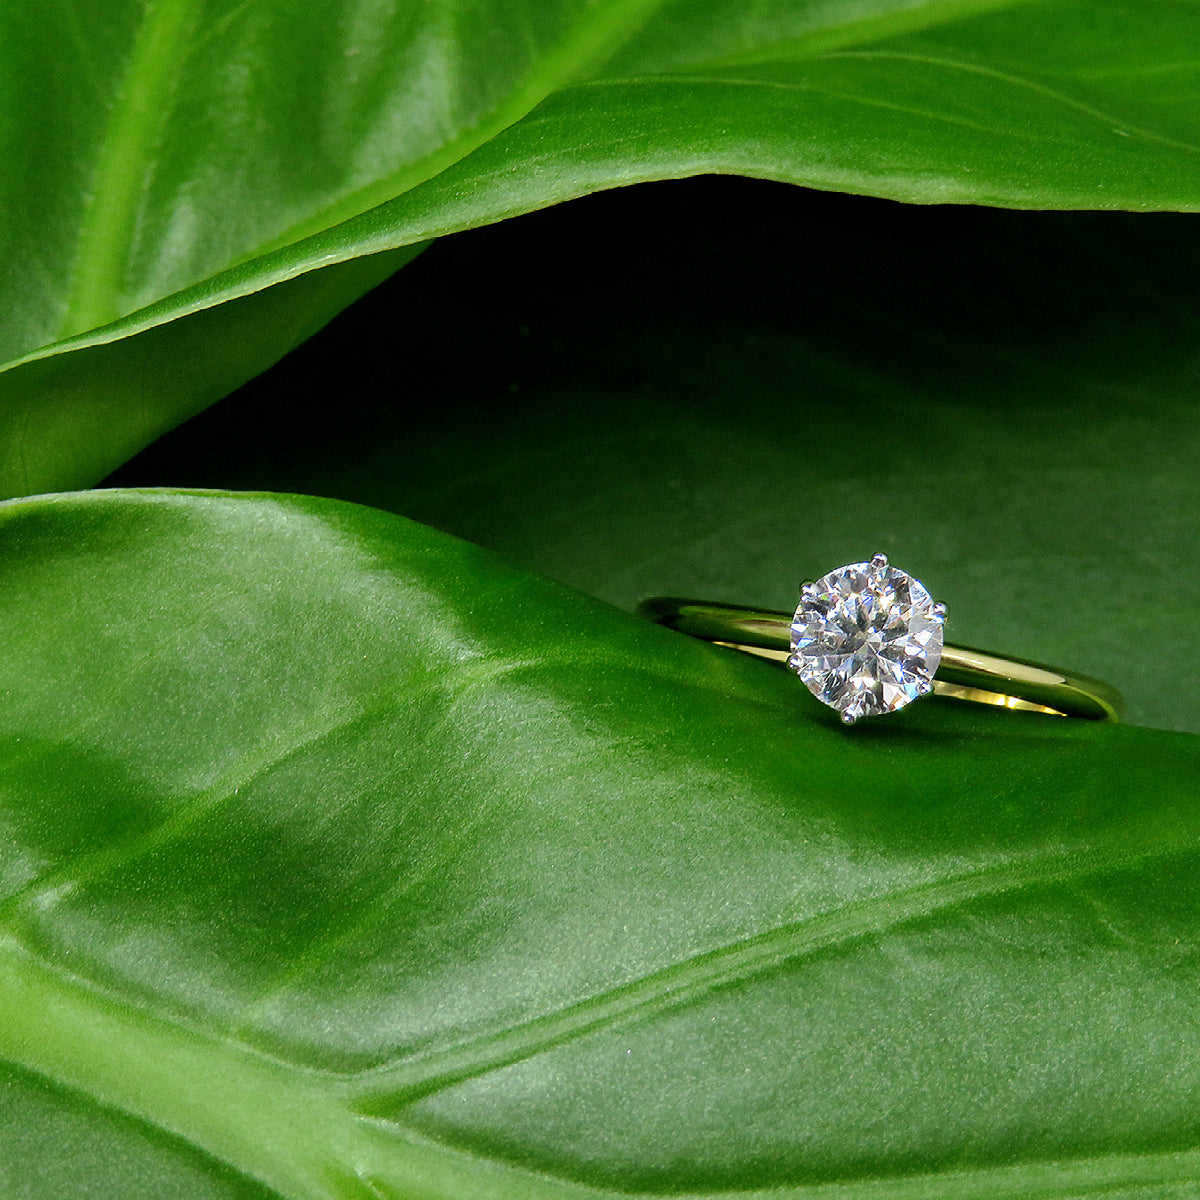 Stunning 0.70ct lab grown diamond solitaire ring by greenhouse diamonds